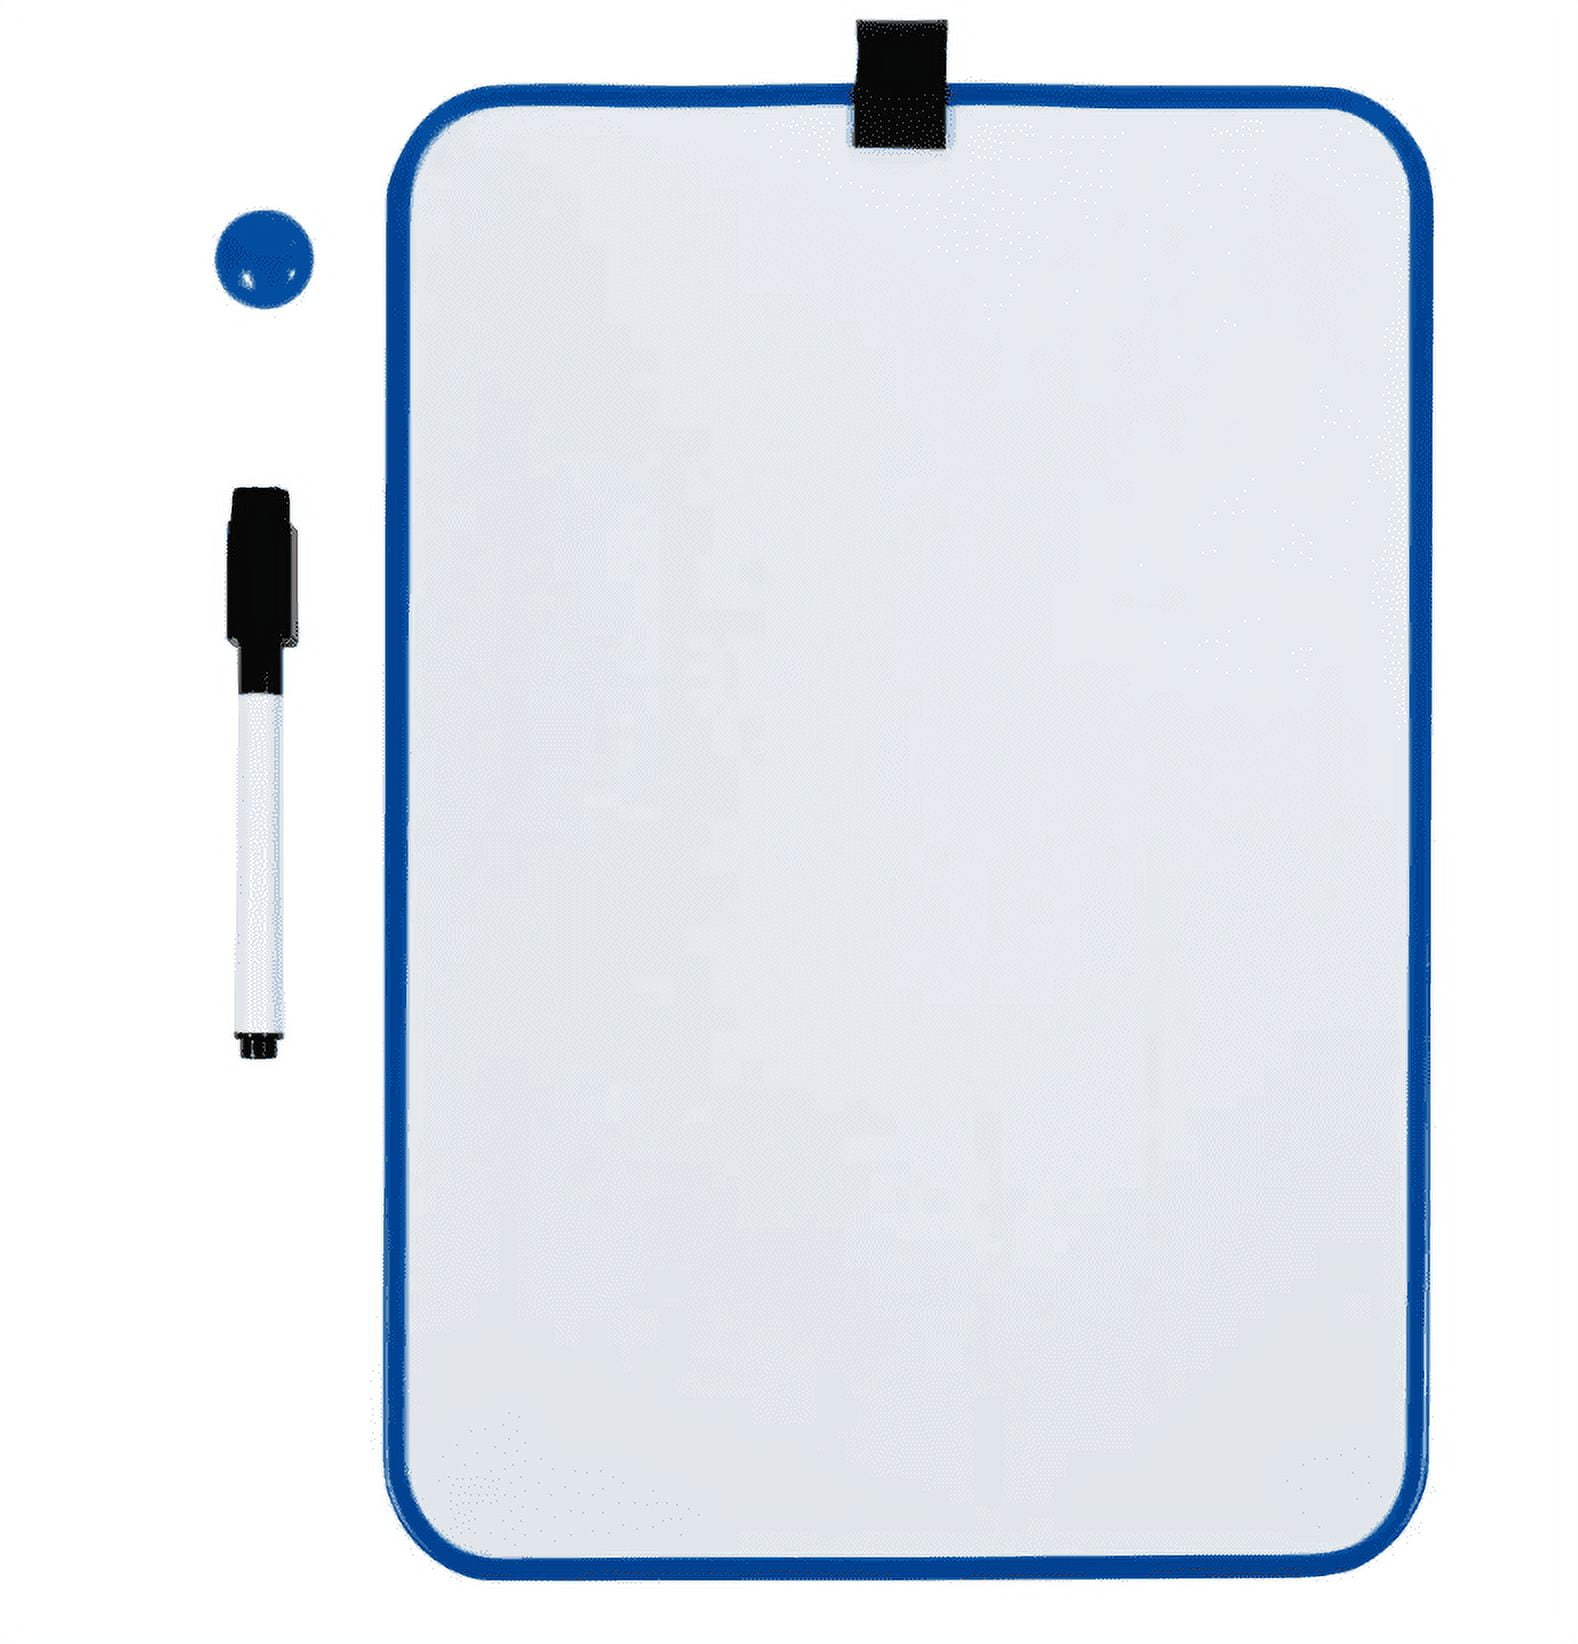 6 Pack Dry Erase Board-5.82 x 8.27 inch Small White Board- Refrigerator Whiteboard-Self-Adhesive Peel & Stick Decal Dry Erase Message Board (A5)